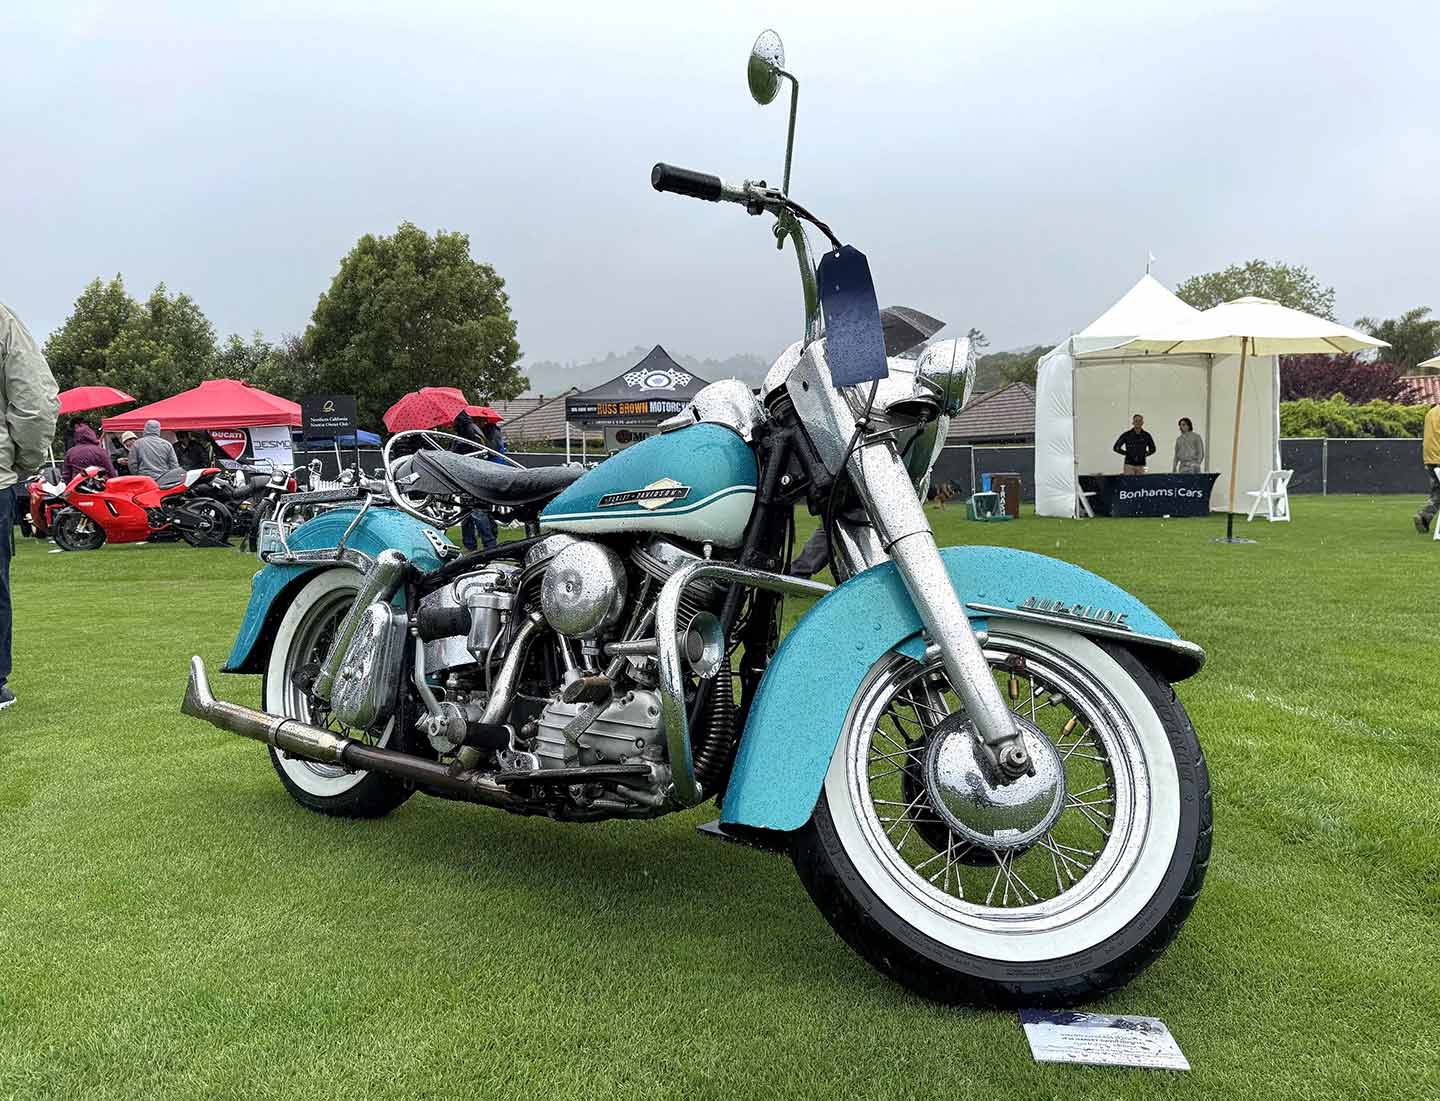 Jason McElroy’s 1964 Harley-Davidson FLH took home the second place award in the American class.